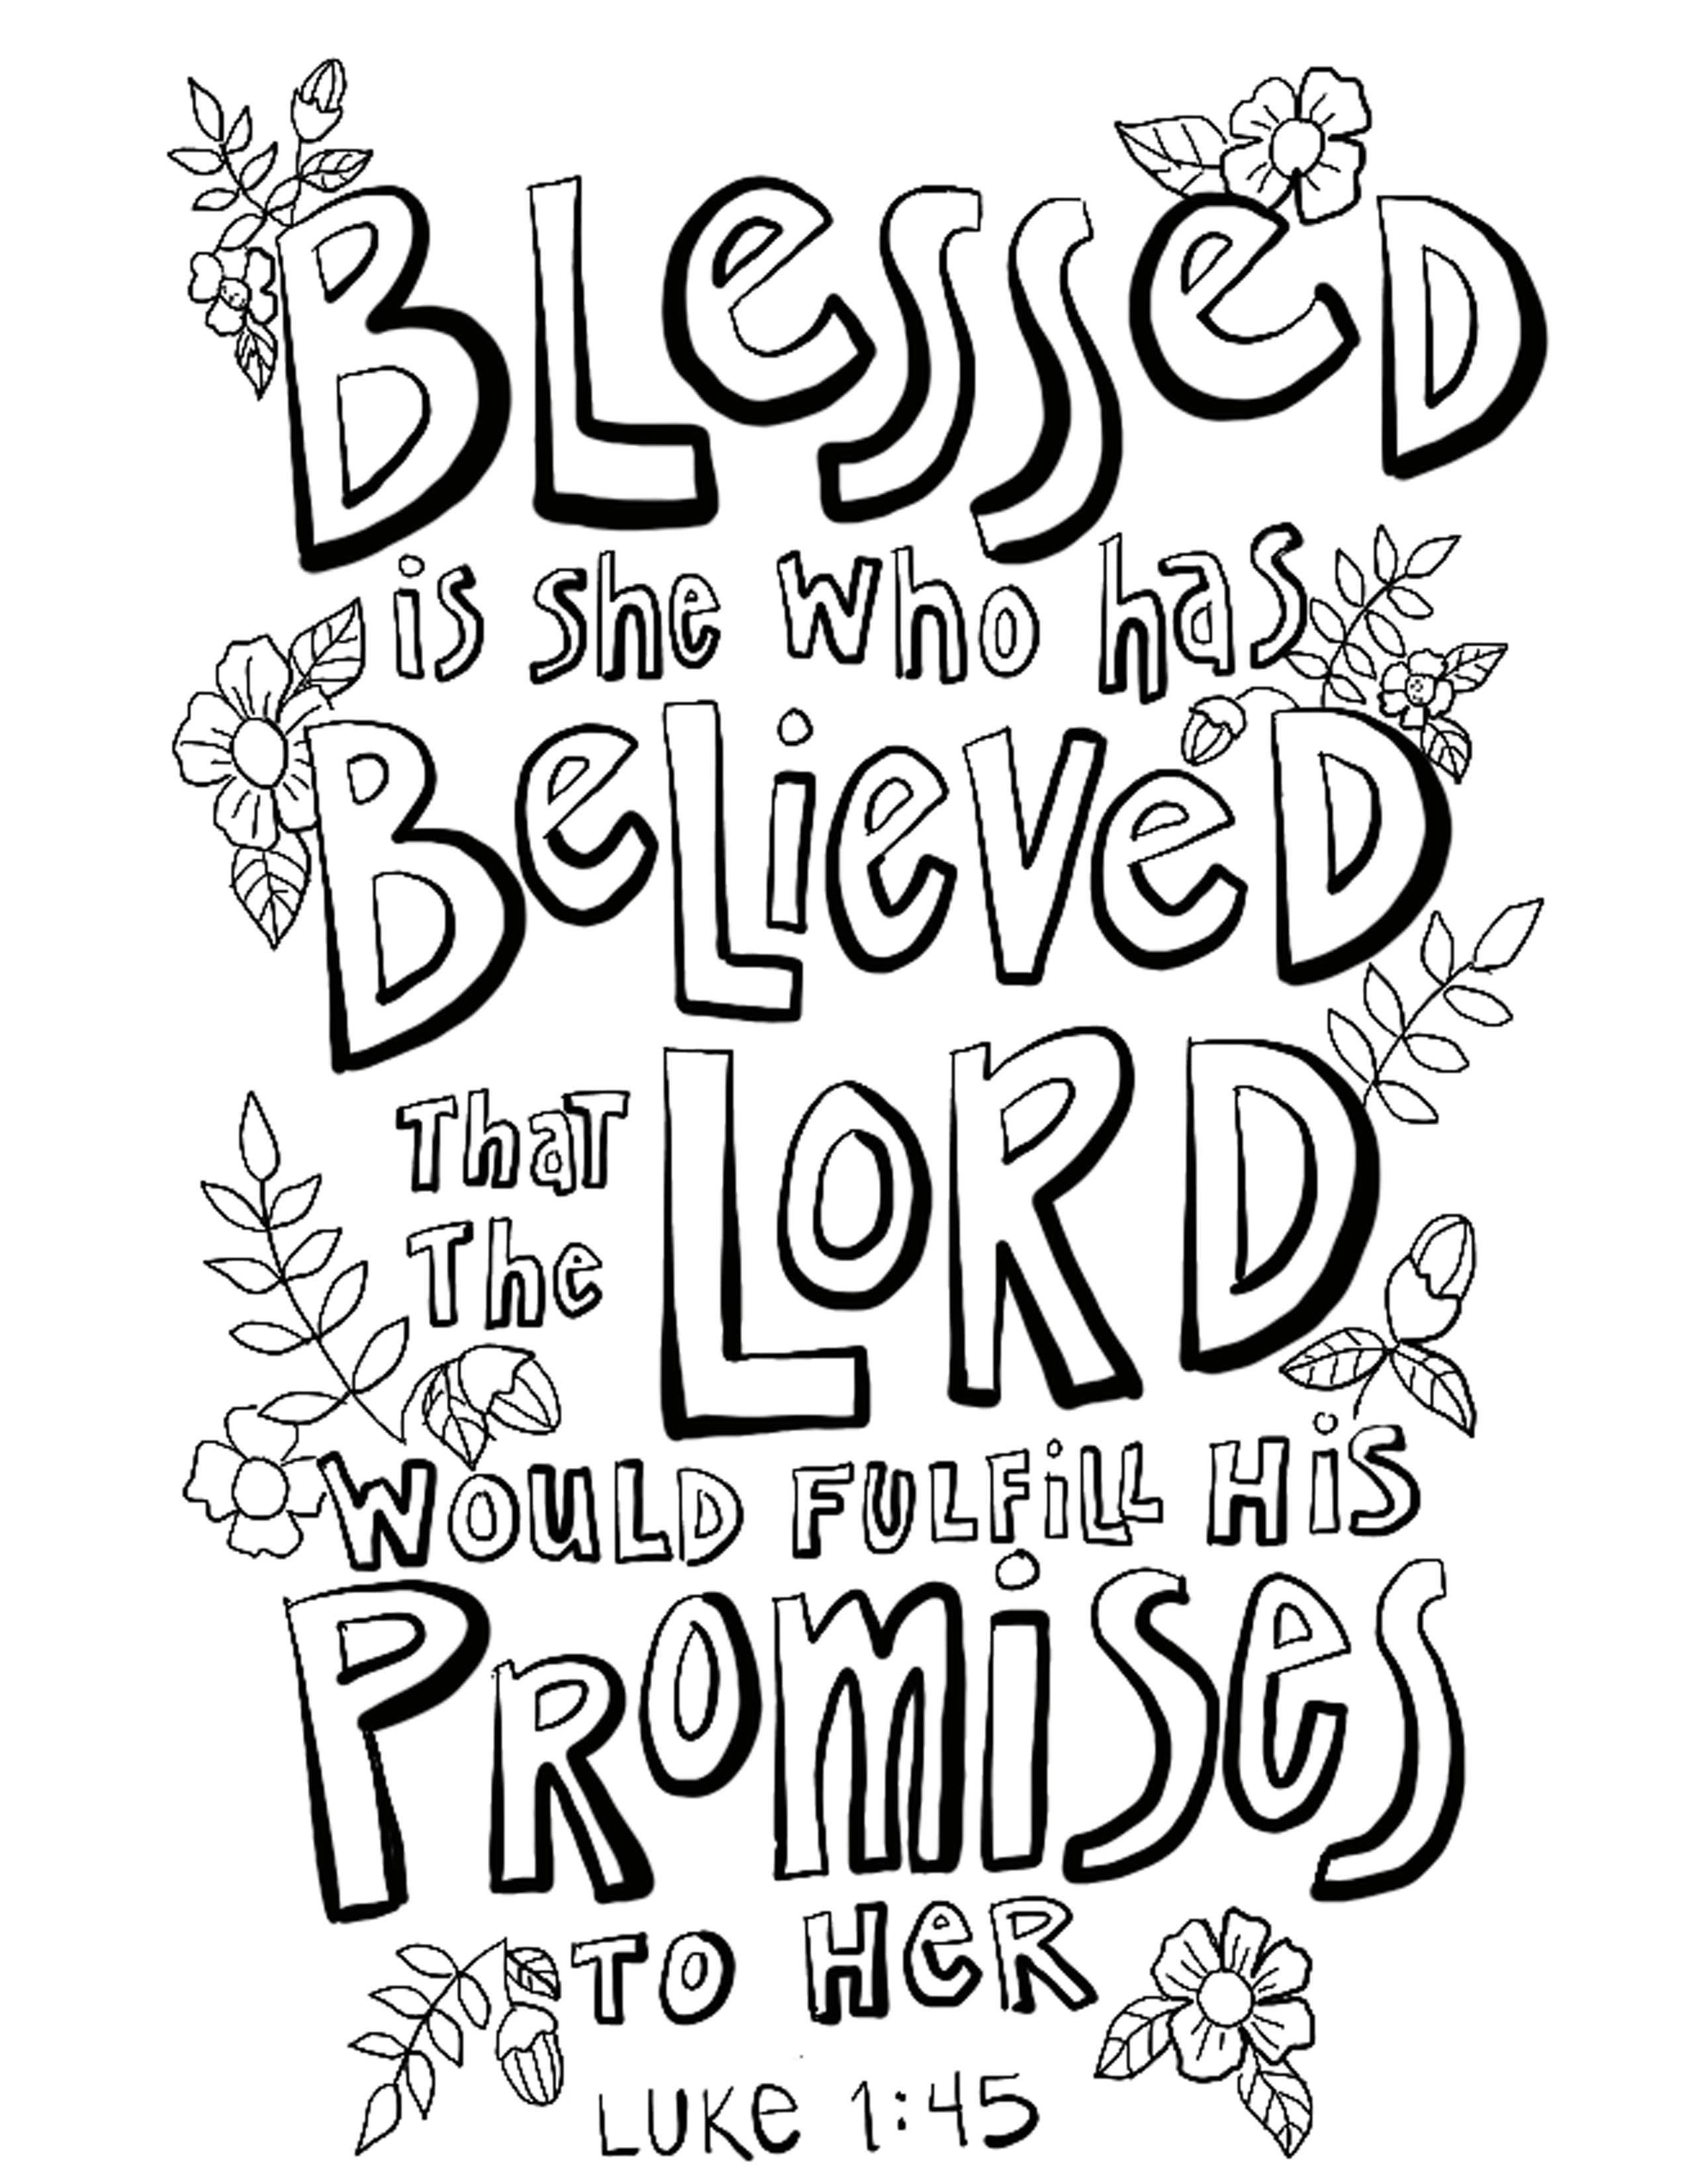 Luke 1:45 coloring page on Procreate – From Victory Road